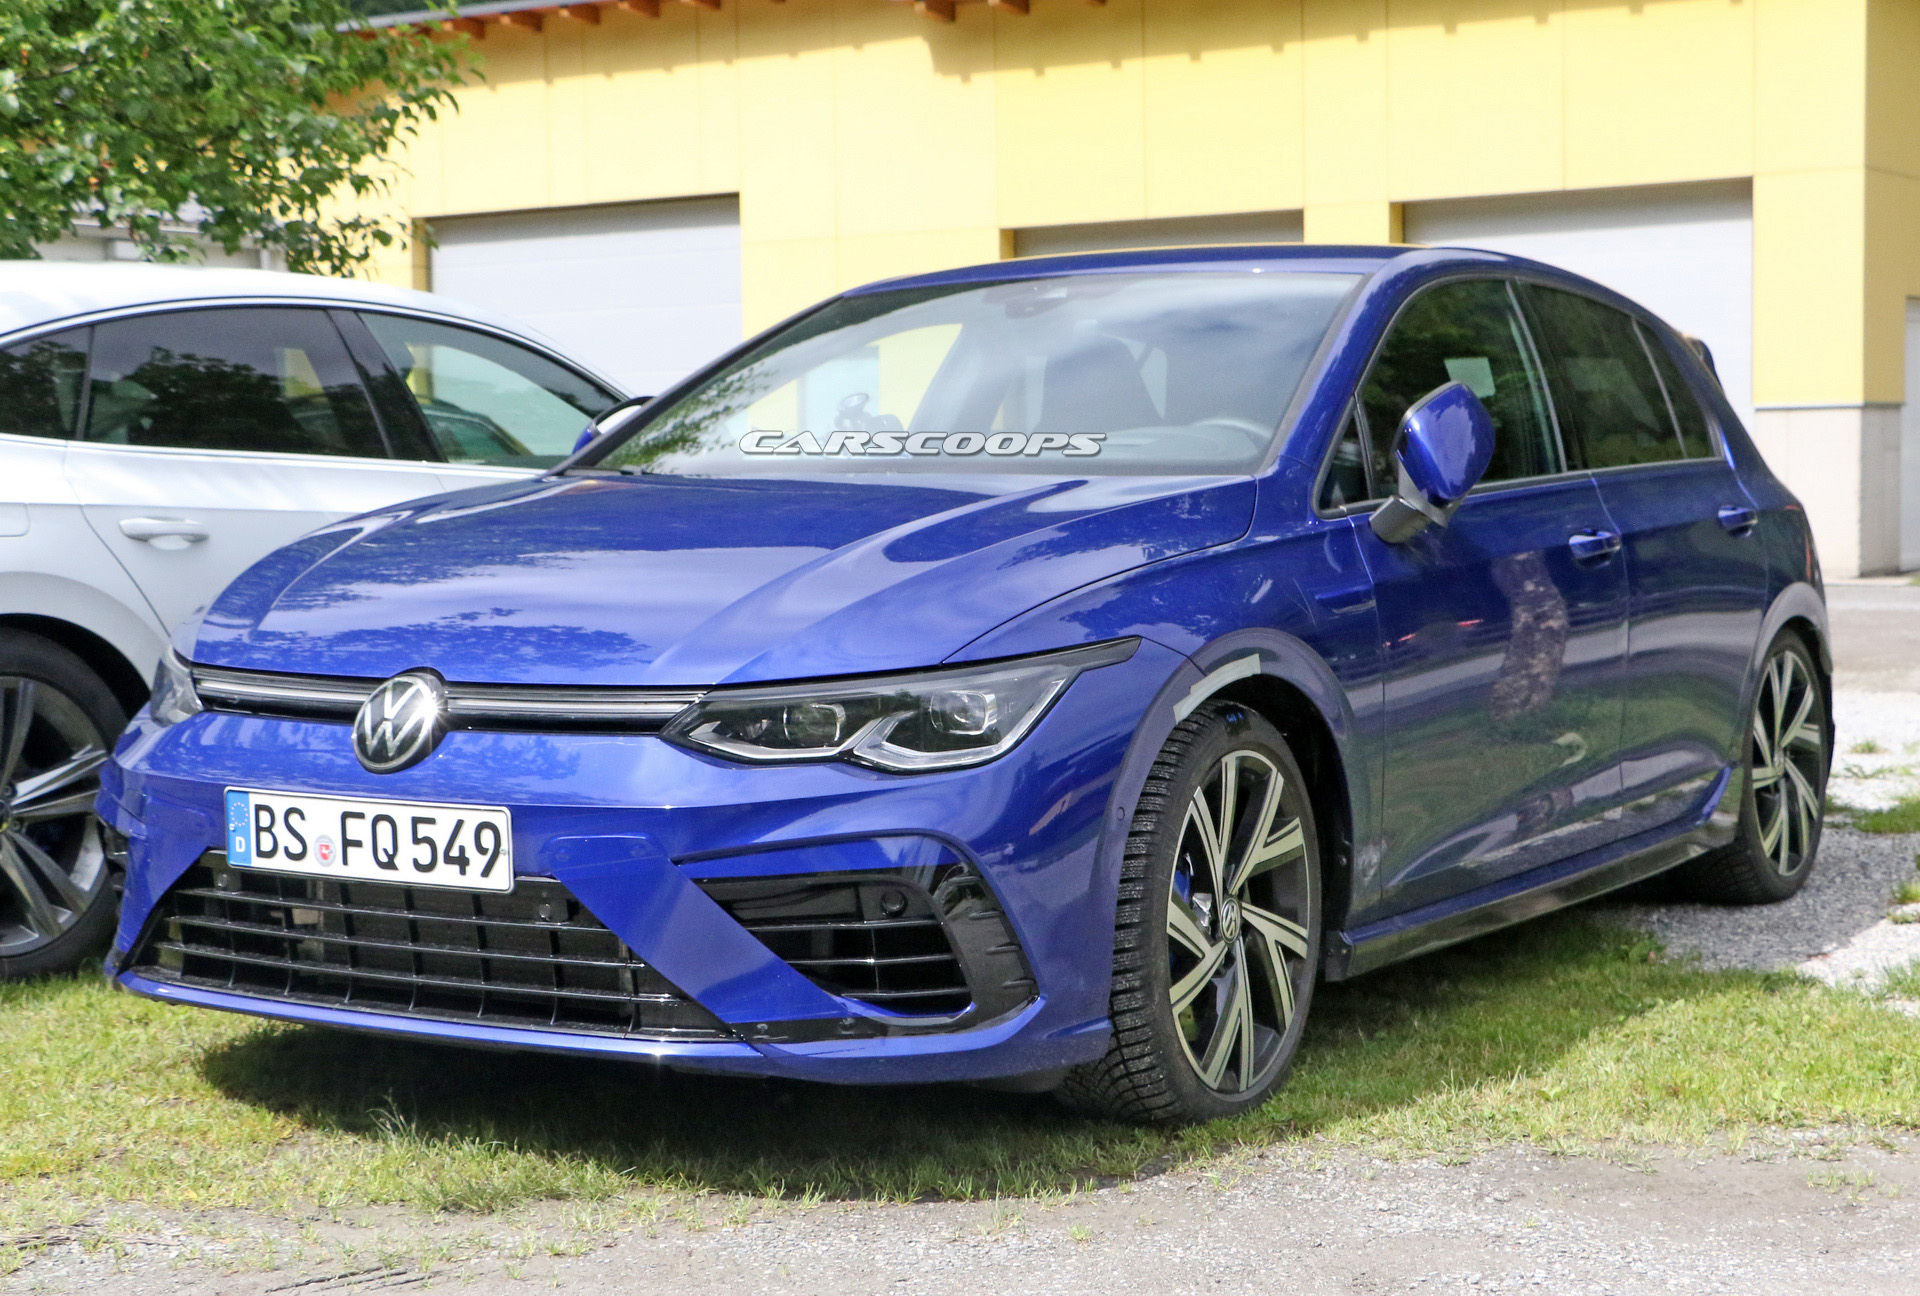 2021 VW Golf R Caught Undisguised, Hot Hatch Could Have Around 328 HP